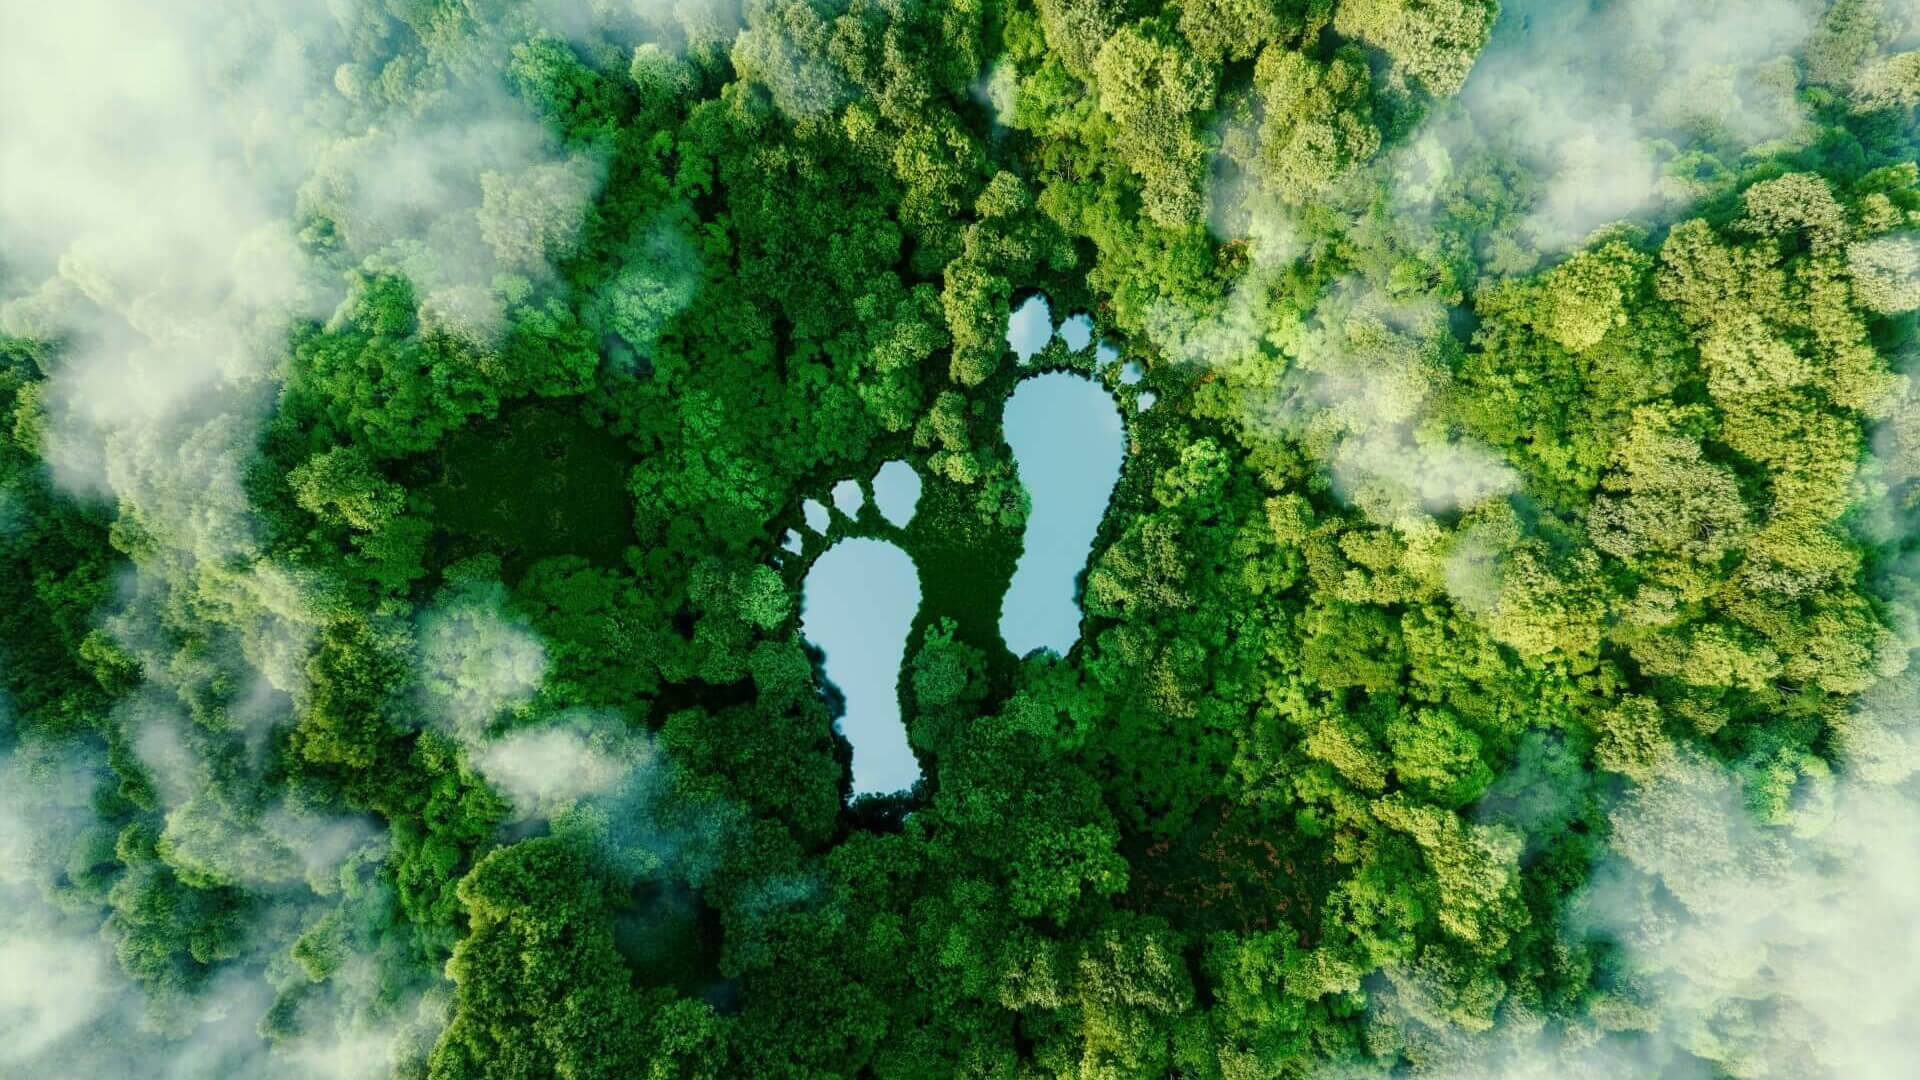 Footprint outlines on a birdseye view of tree tops